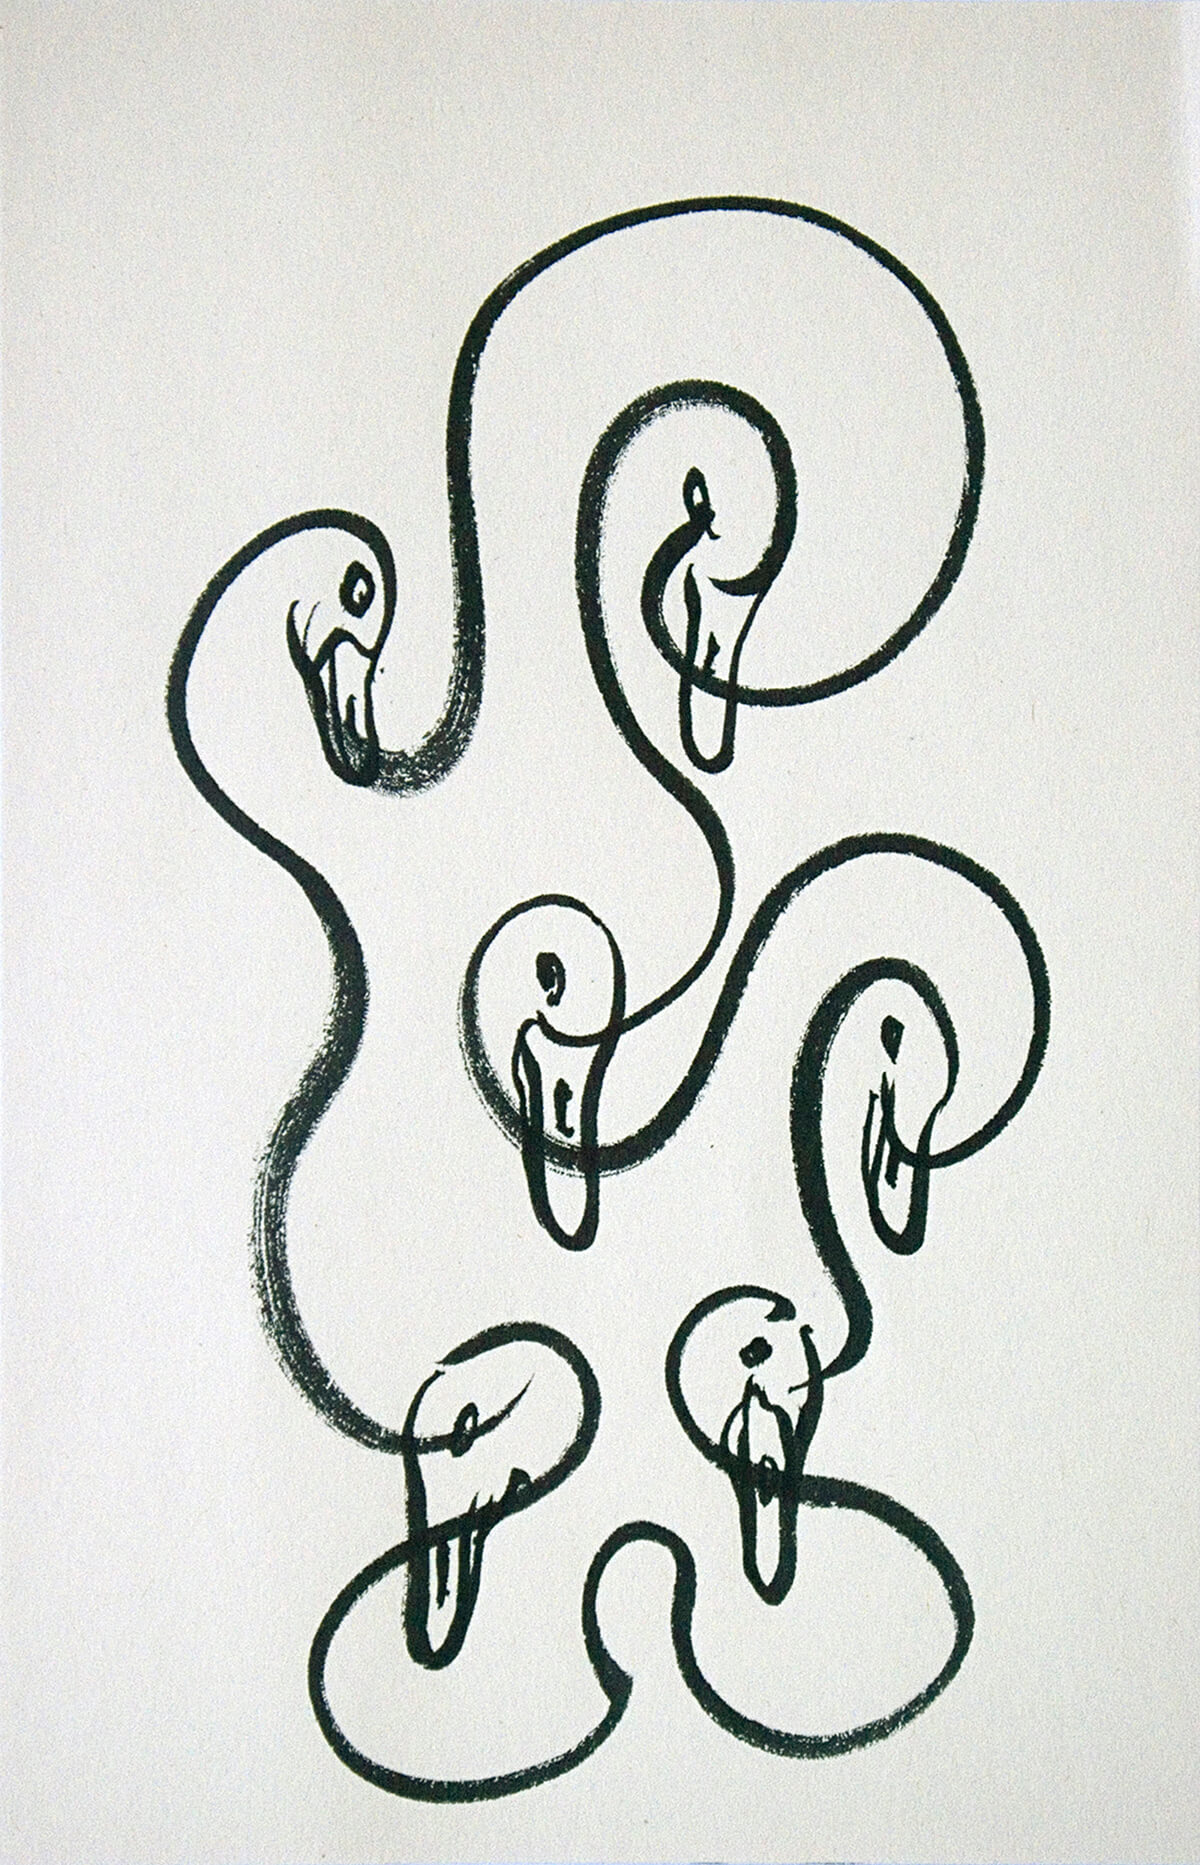 untitled (swans), 23 x 14 cm, ink on paper, 2015